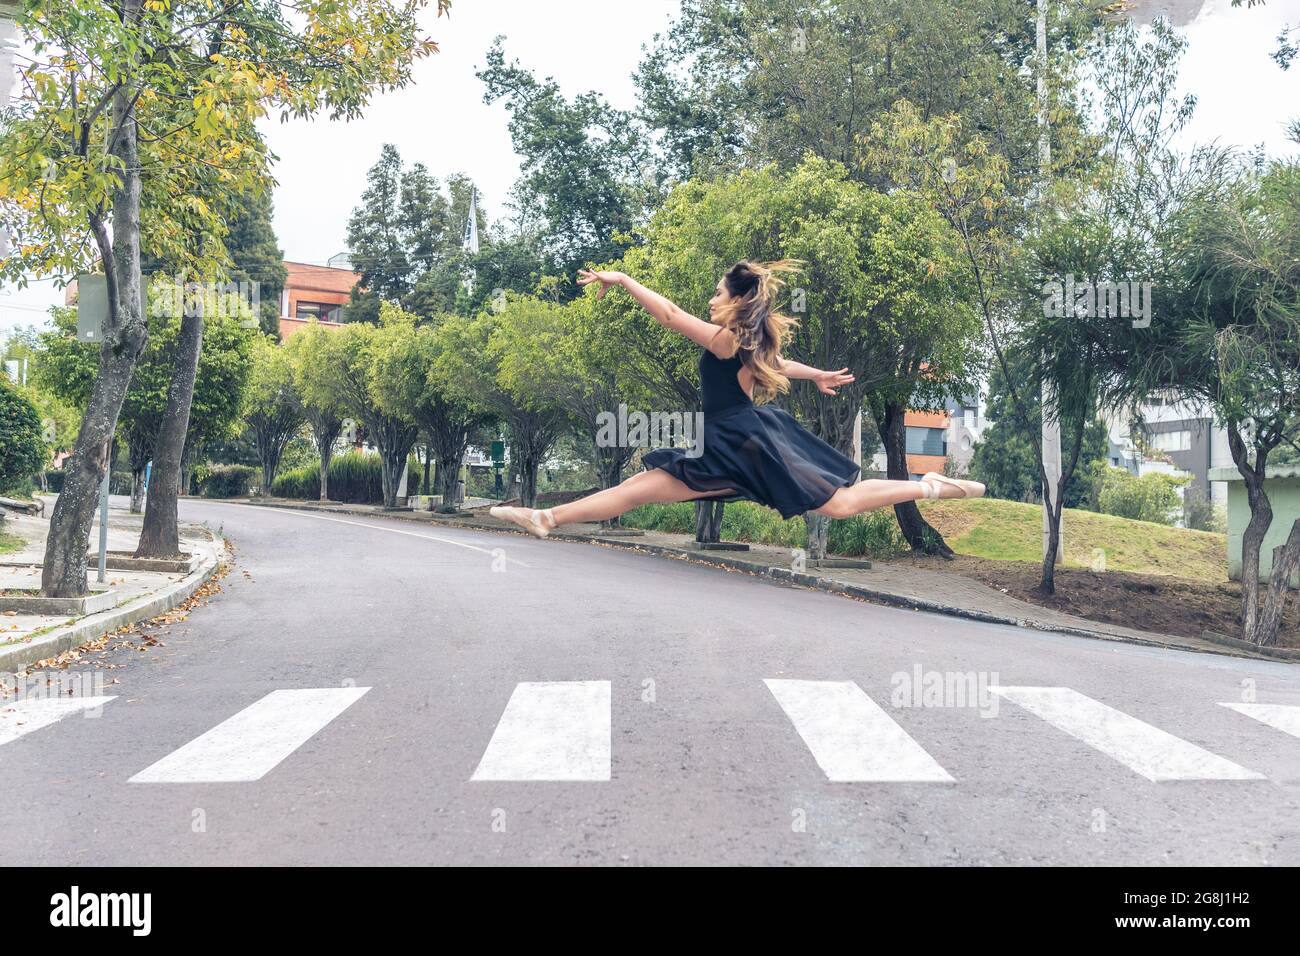 Ballet dancer performing a grand jete on a pedestrian crossing in the street Stock Photo